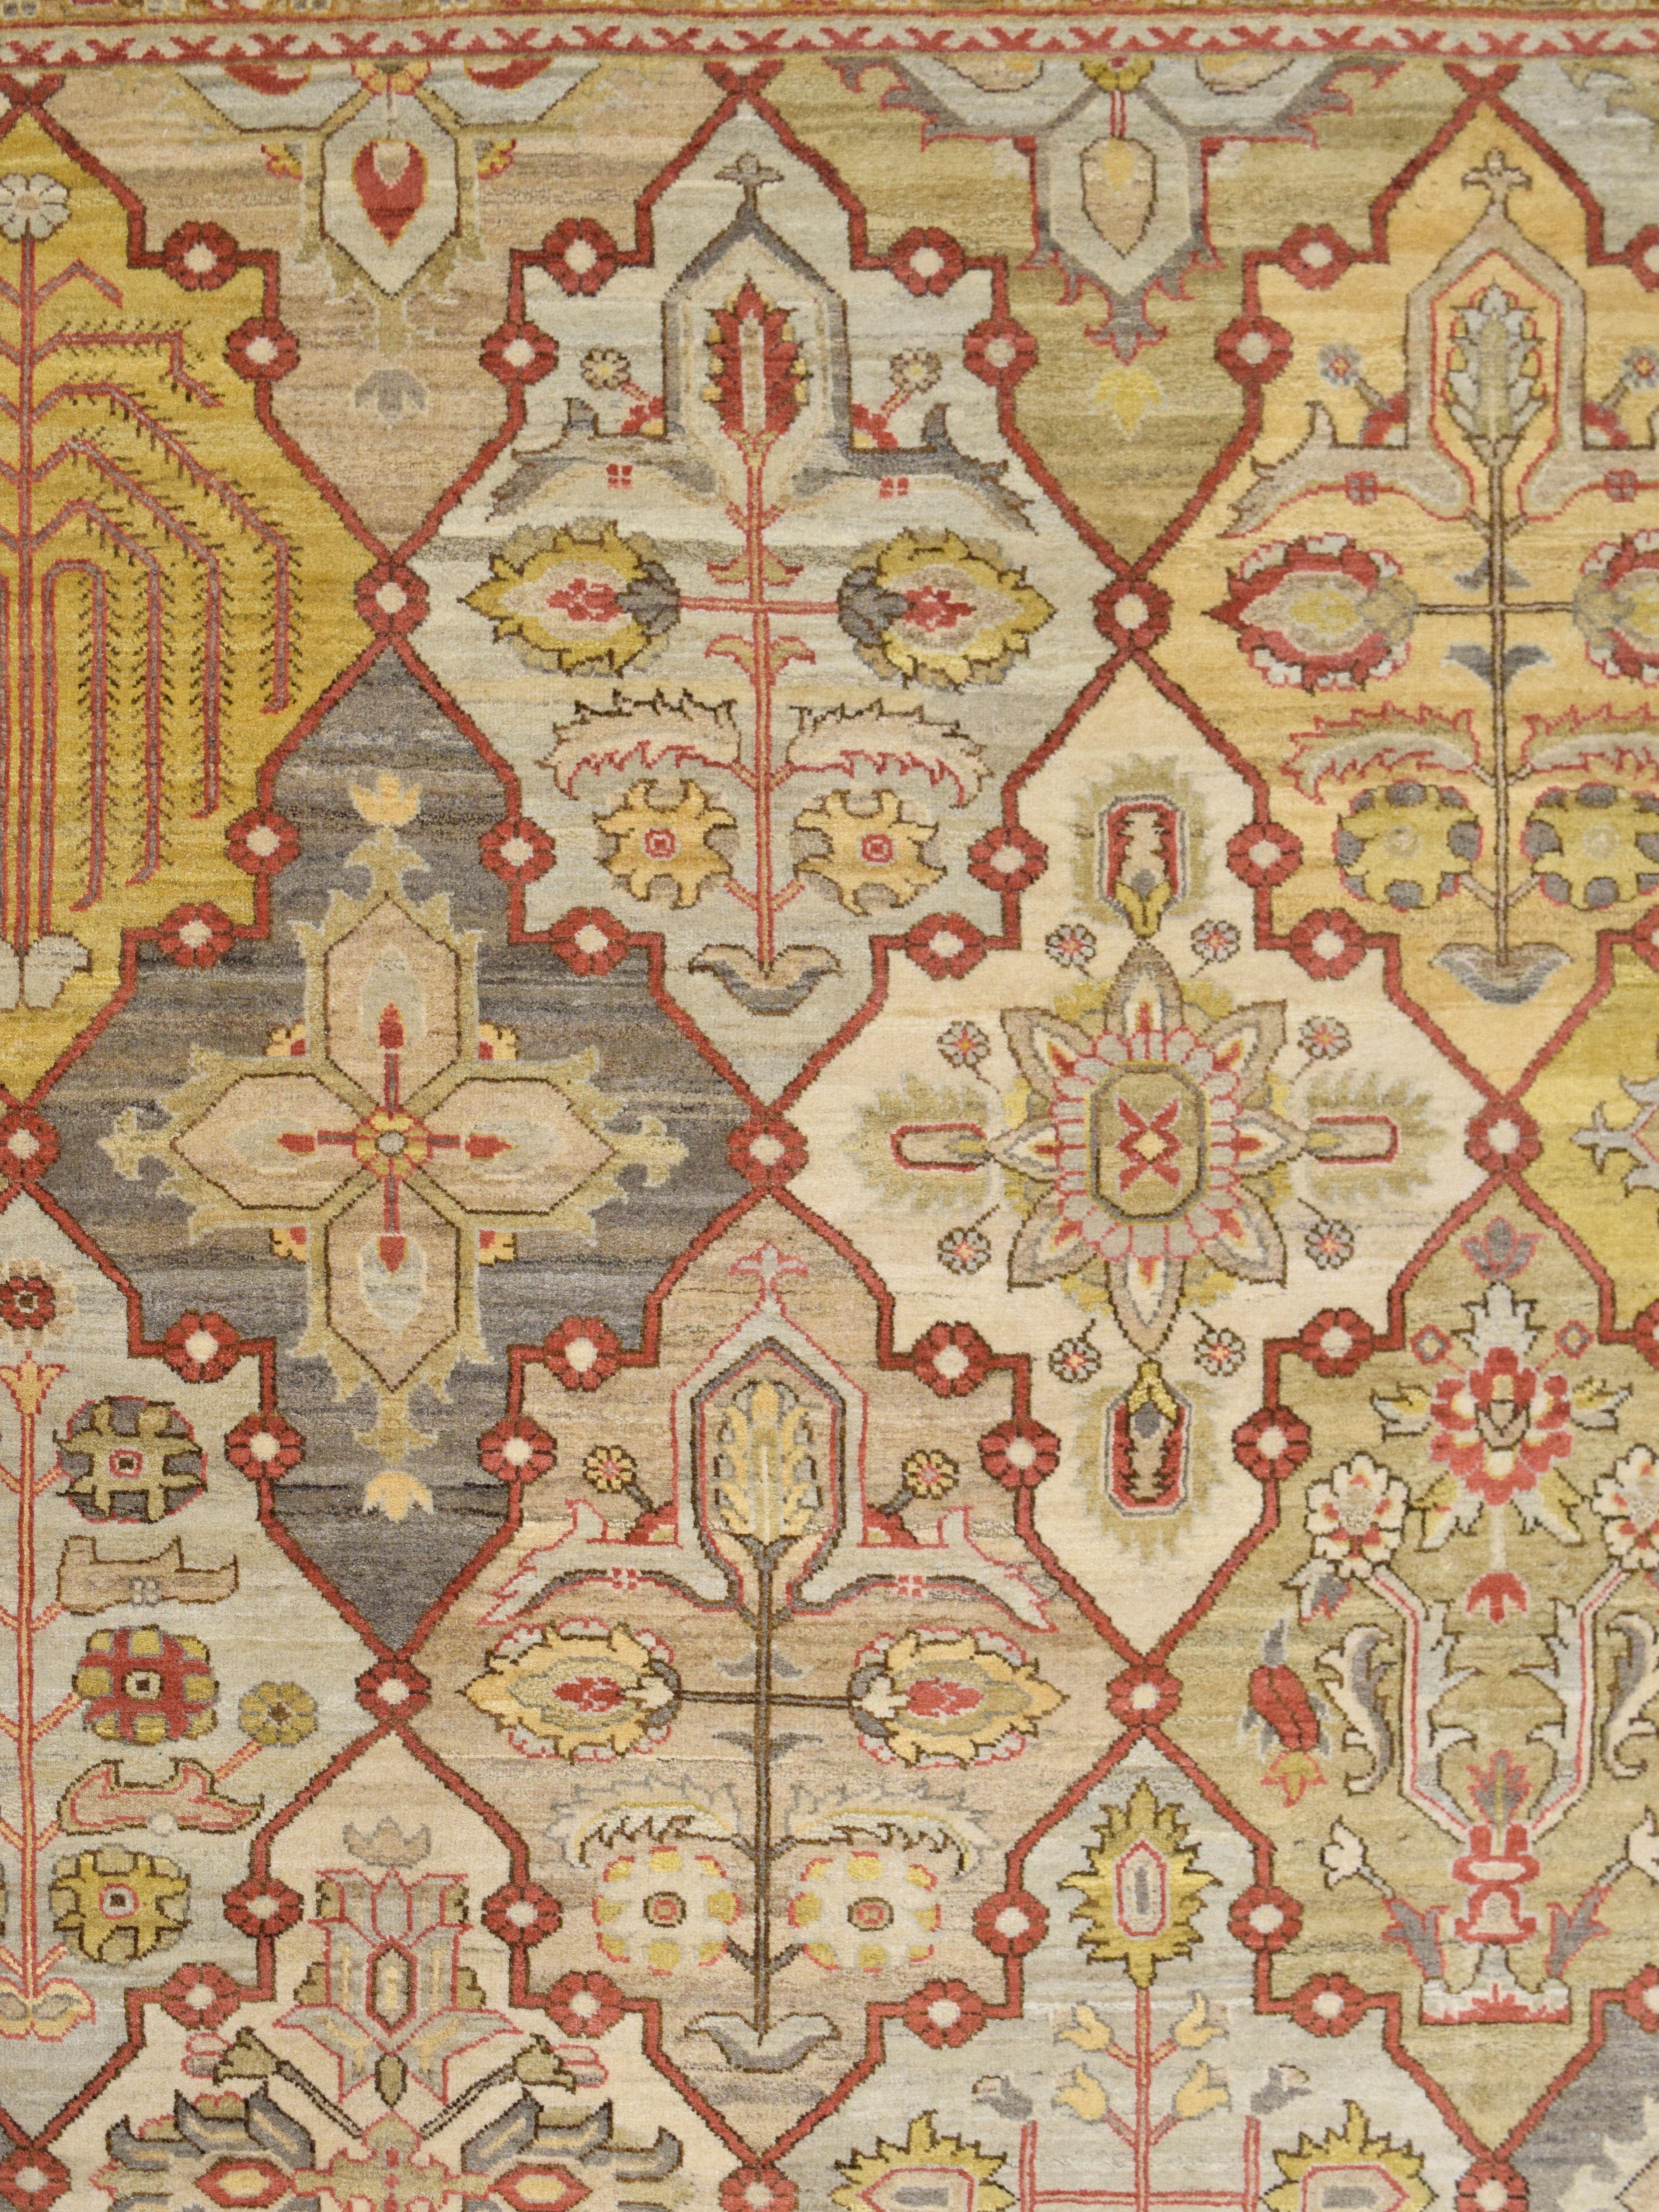 In warm and inviting shades of red, taupe, gray, and gold wool, this hand-knotted carpet features a classic Persian Bakhtiari design and belongs to the Orley Shabahang Transitional Collection. Measuring 10’ x 13’10”, this carpet features a cotton